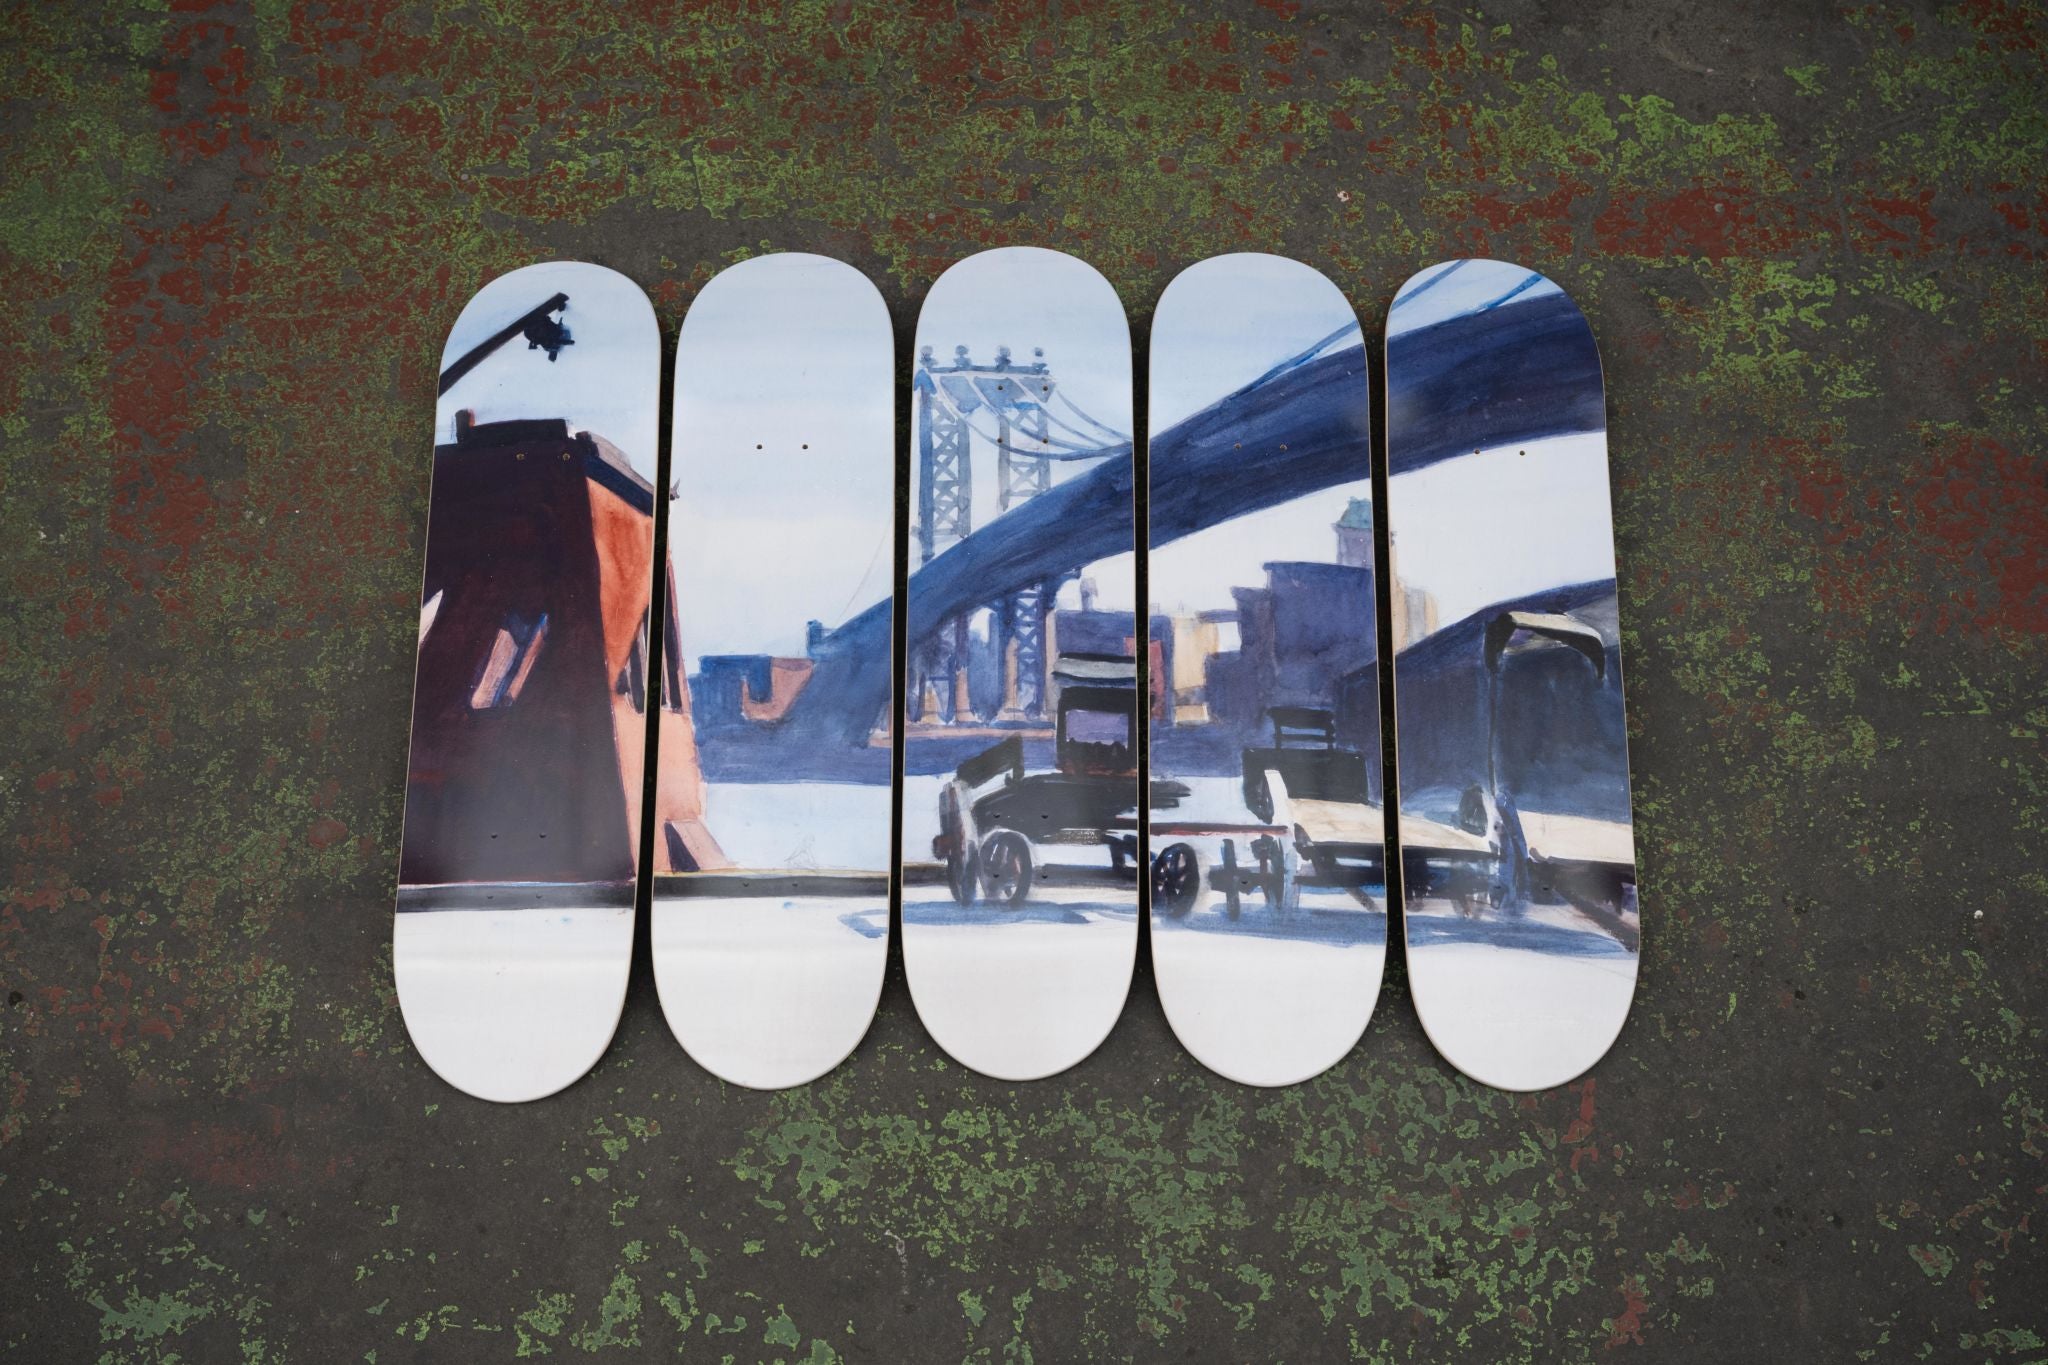 Taking New York with Edward HOPPER Collection with Whitney Museum & ARS –  THE SKATEROOM